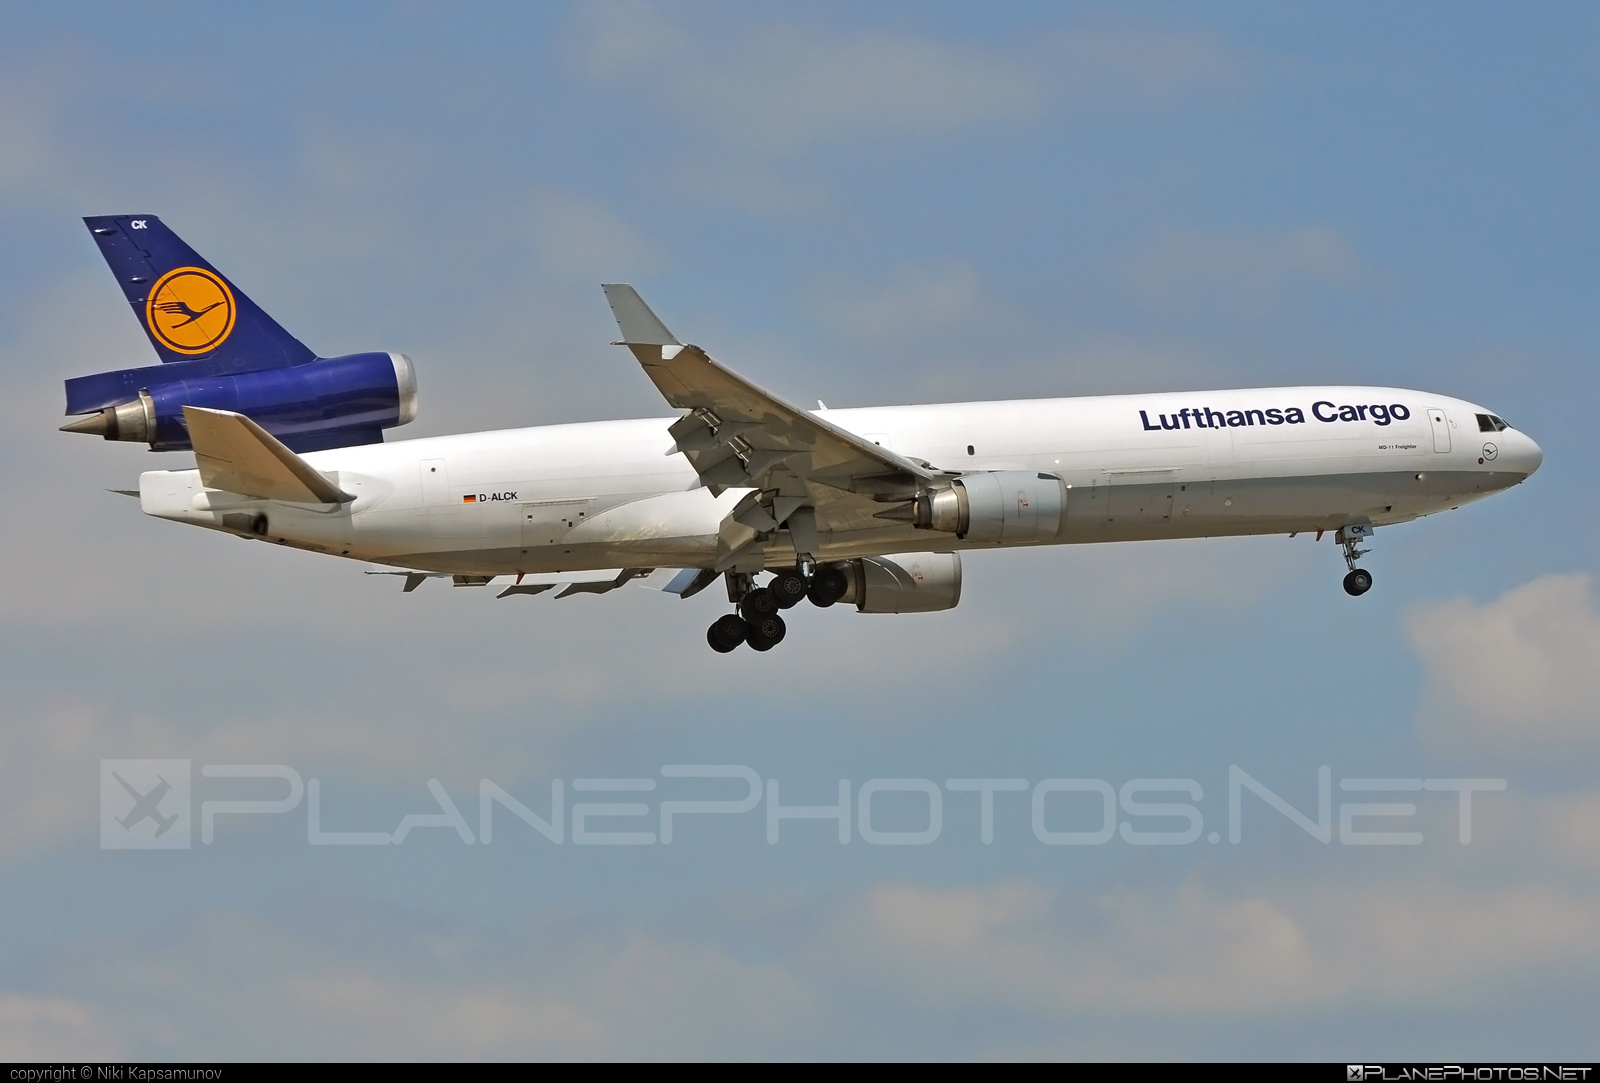 McDonnell Douglas MD-11F - D-ALCK operated by Lufthansa Cargo #lufthansa #lufthansacargo #mcDonnellDouglas #mcdonnelldouglas11 #mcdonnelldouglas11f #mcdonnelldouglasmd11 #mcdonnelldouglasmd11f #md11 #md11f